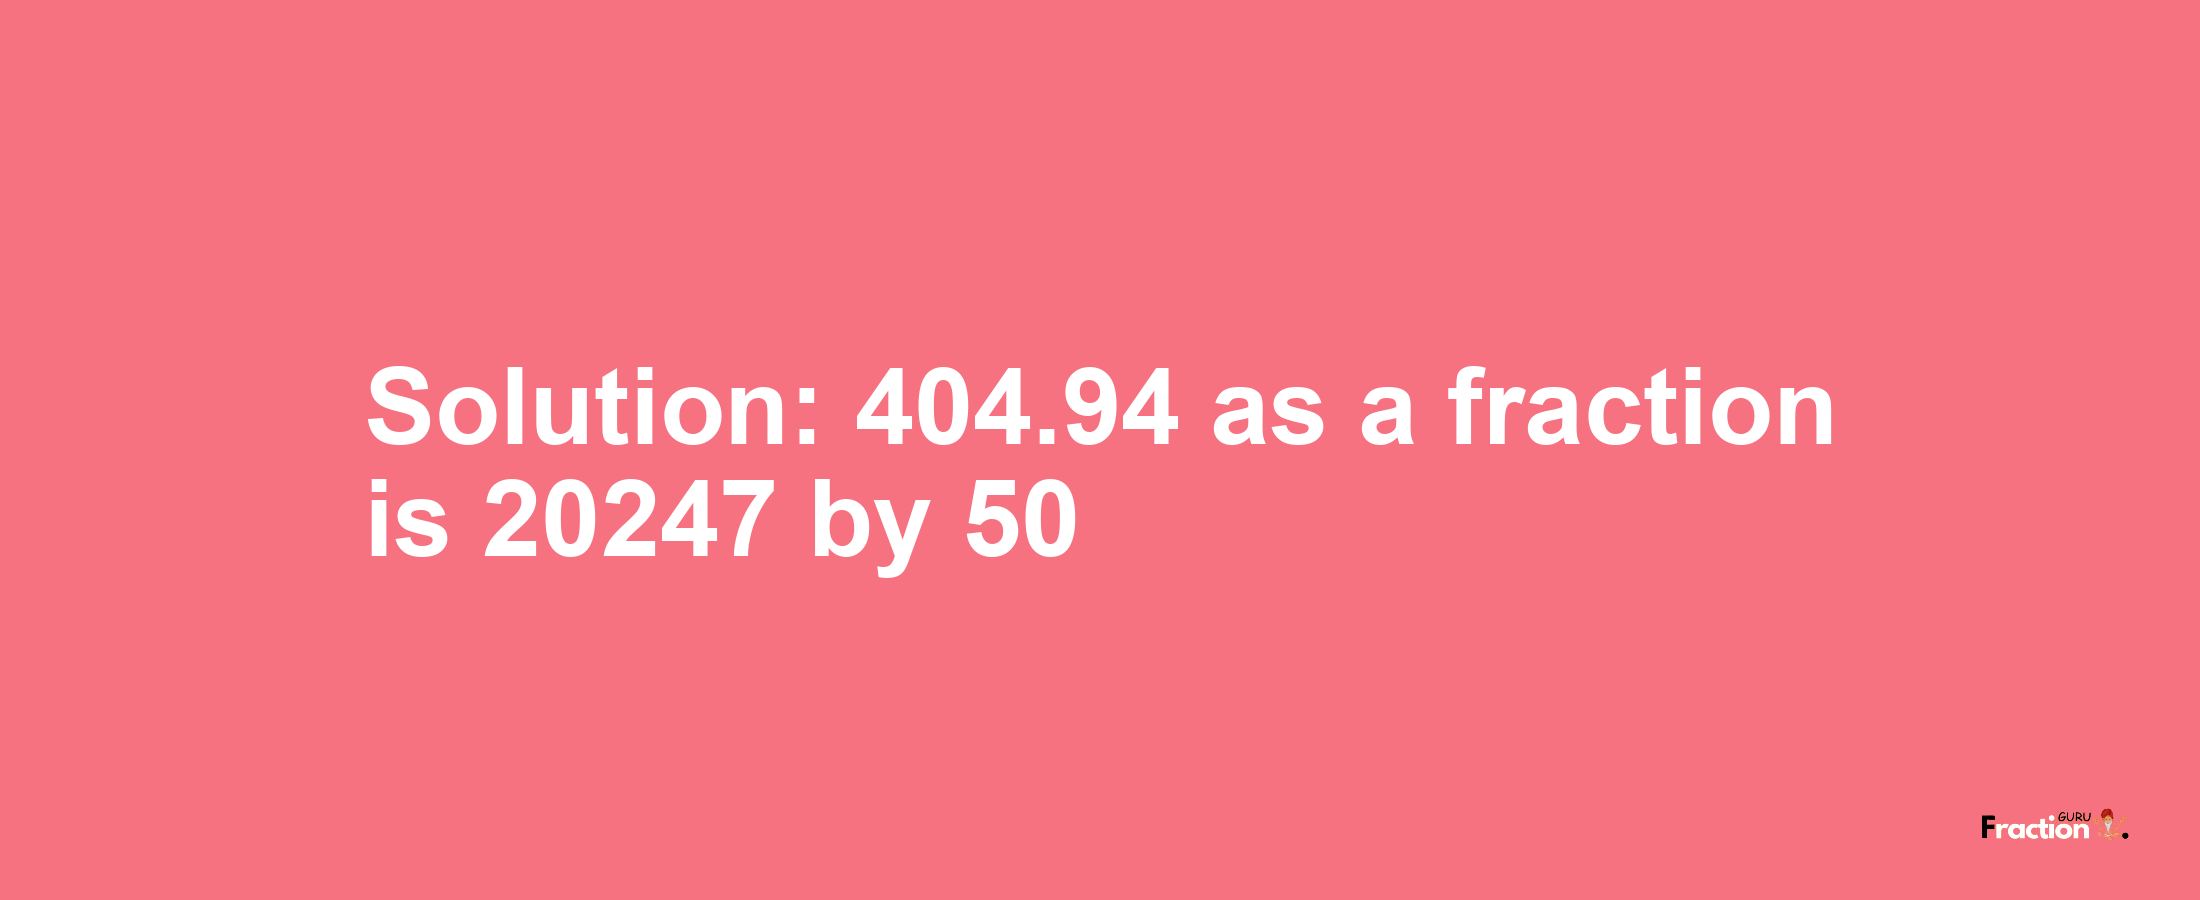 Solution:404.94 as a fraction is 20247/50